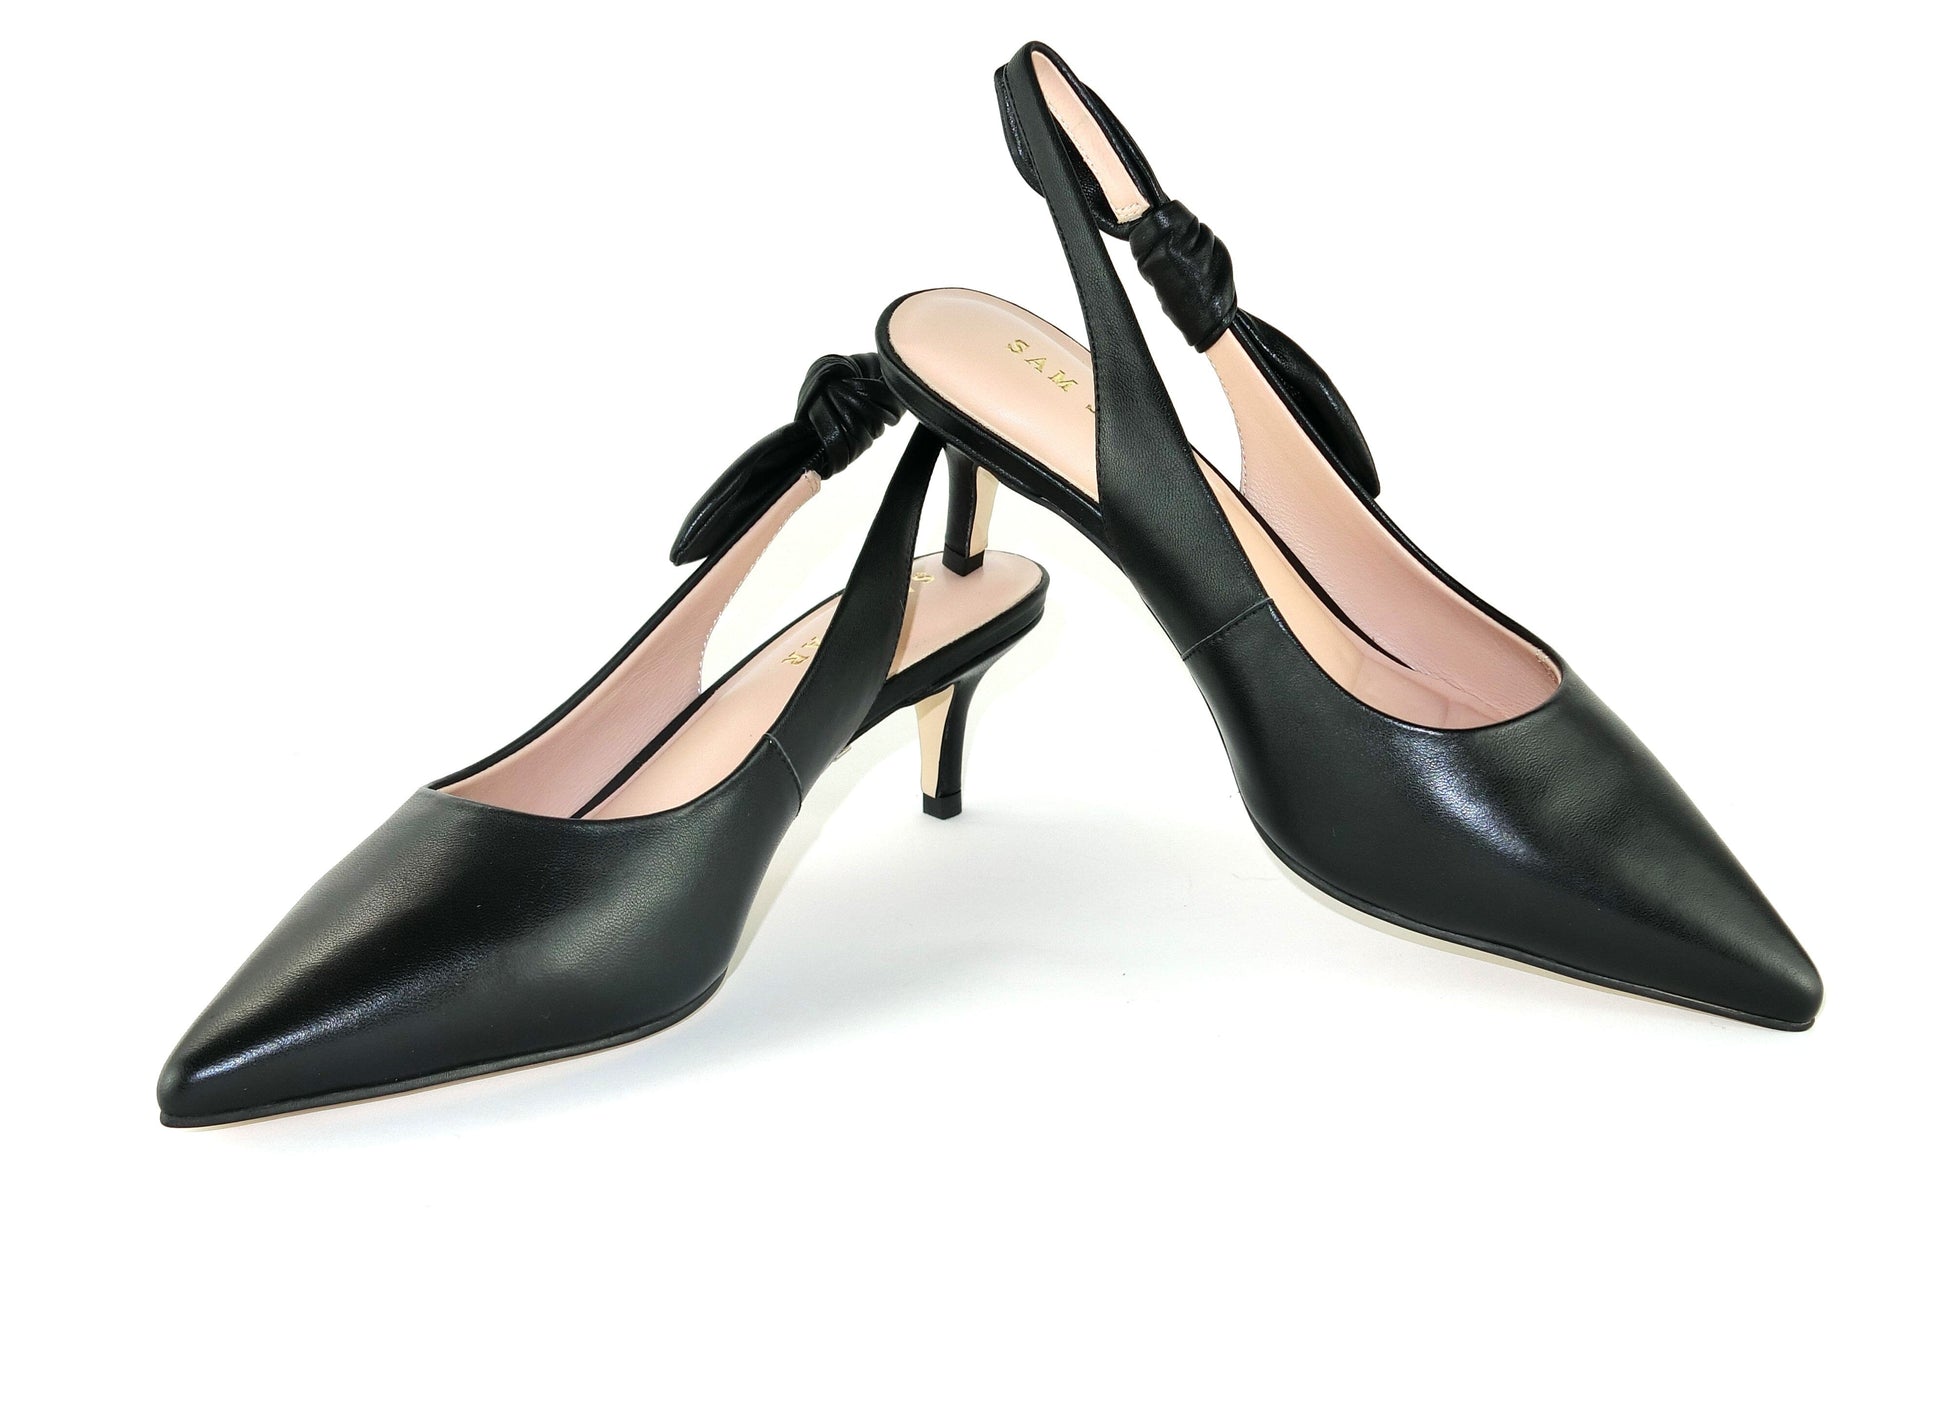 SS23006 Leather court shoes with sling back design (removable bow) Black and Beige ladies shoes Sam Star shoes Black 37/4 